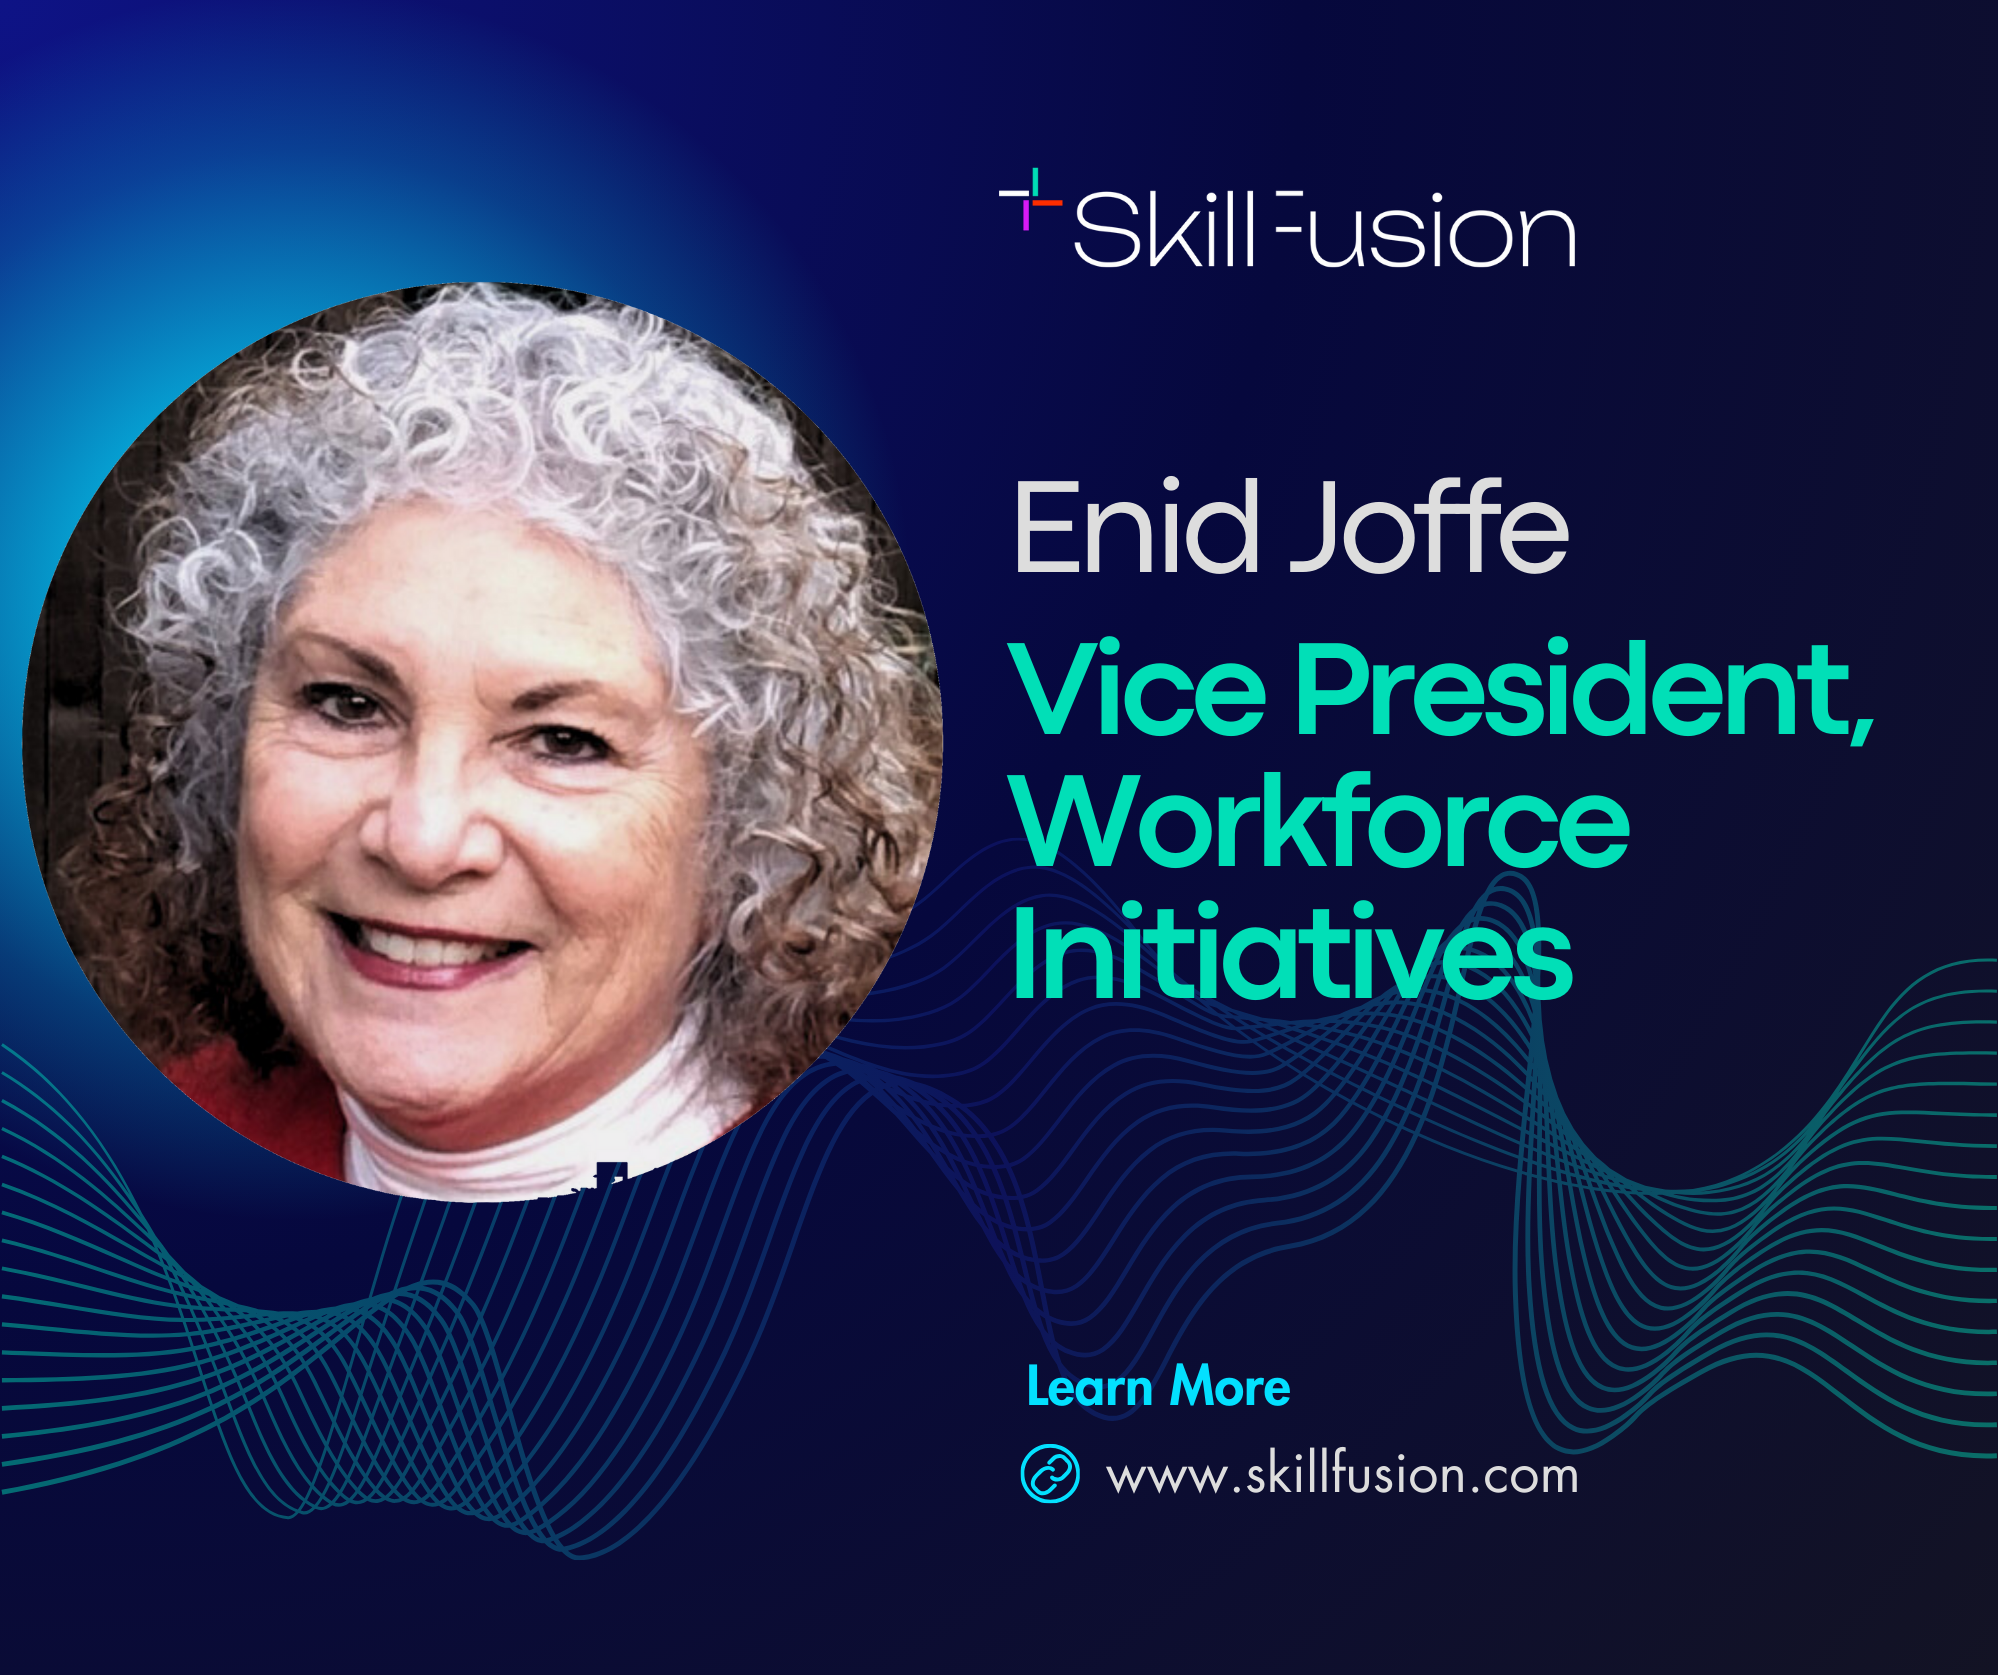 Skillfusion Welcomes Enid Joffe to Lead EVSE Workforce Initiatives